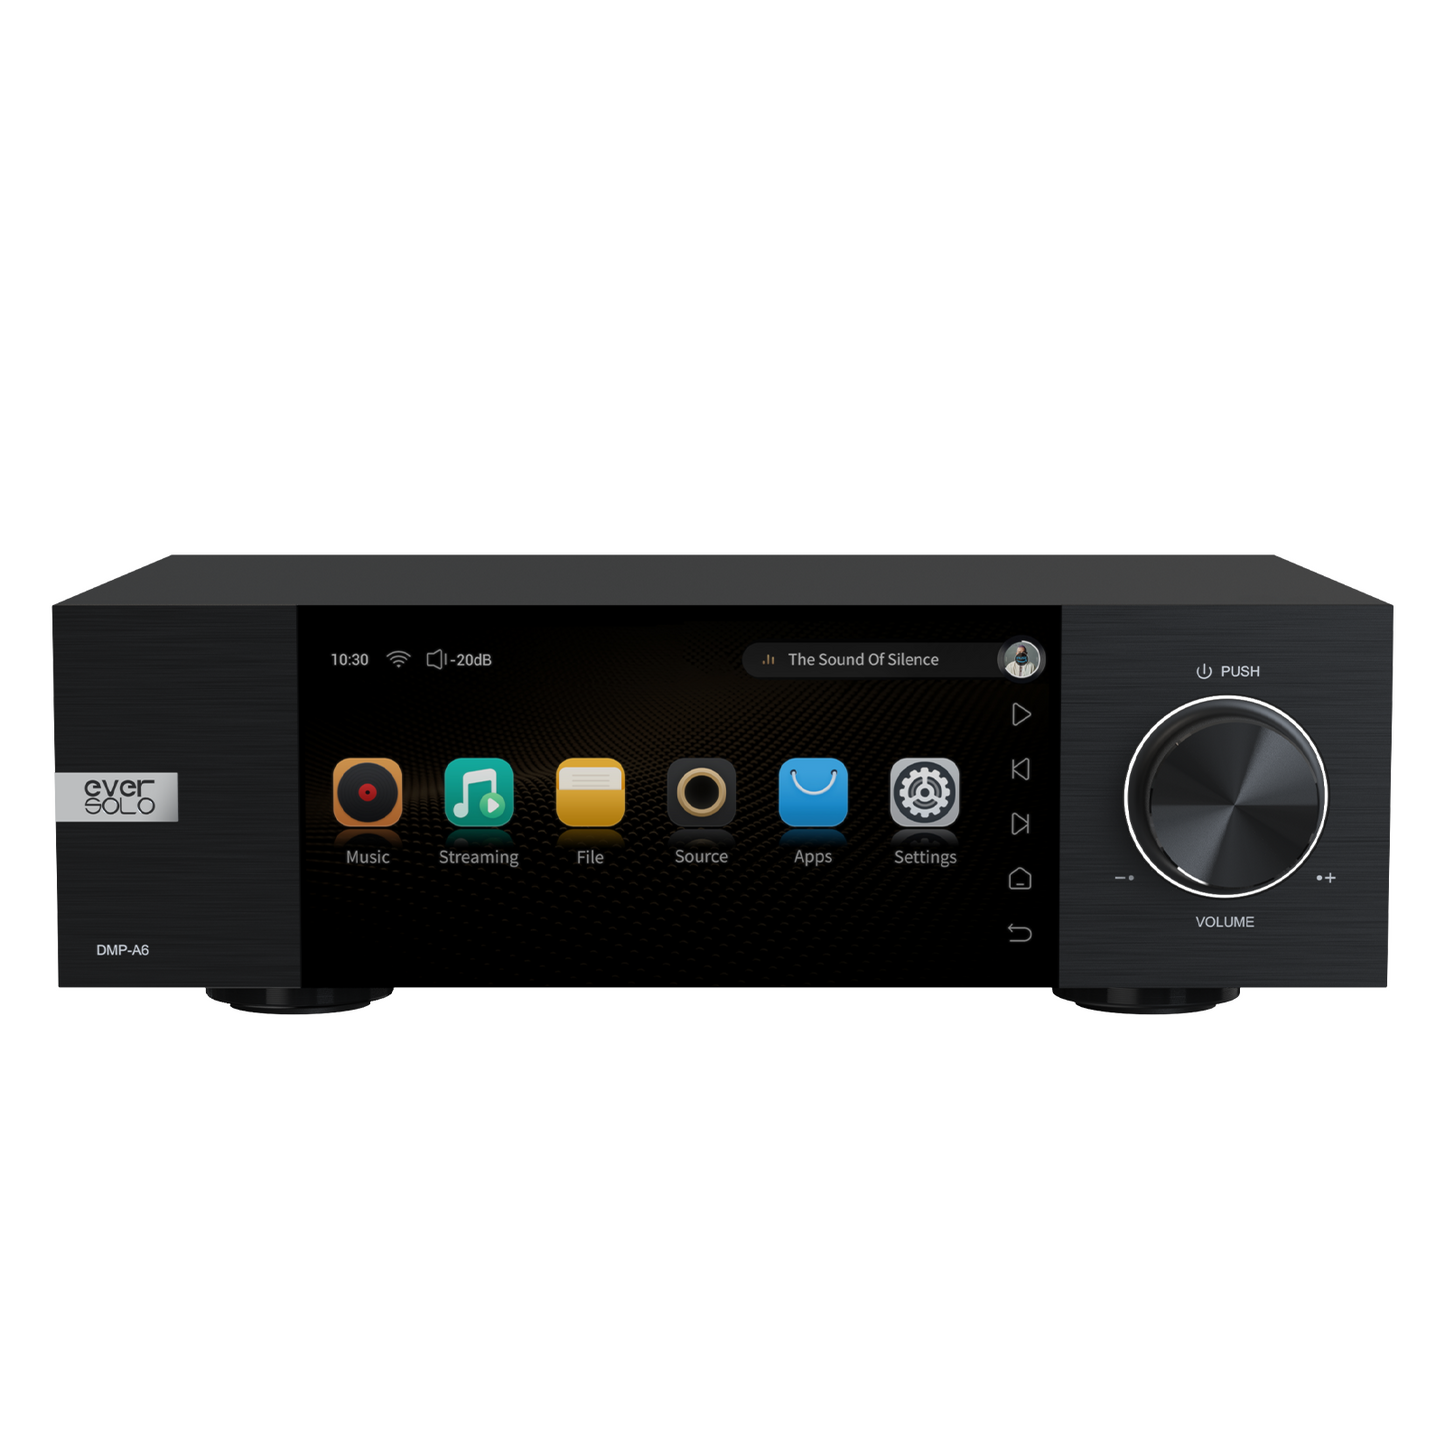 Eversolo DMP-A6 Streamers, Network Player, Music Service and Streaming MQA Full Decode, DAC, DSD512 PCM768kHz/32Bit Bluetooth 5.0 aptX HD, 6’’HD Touchscreen, Exclusive App